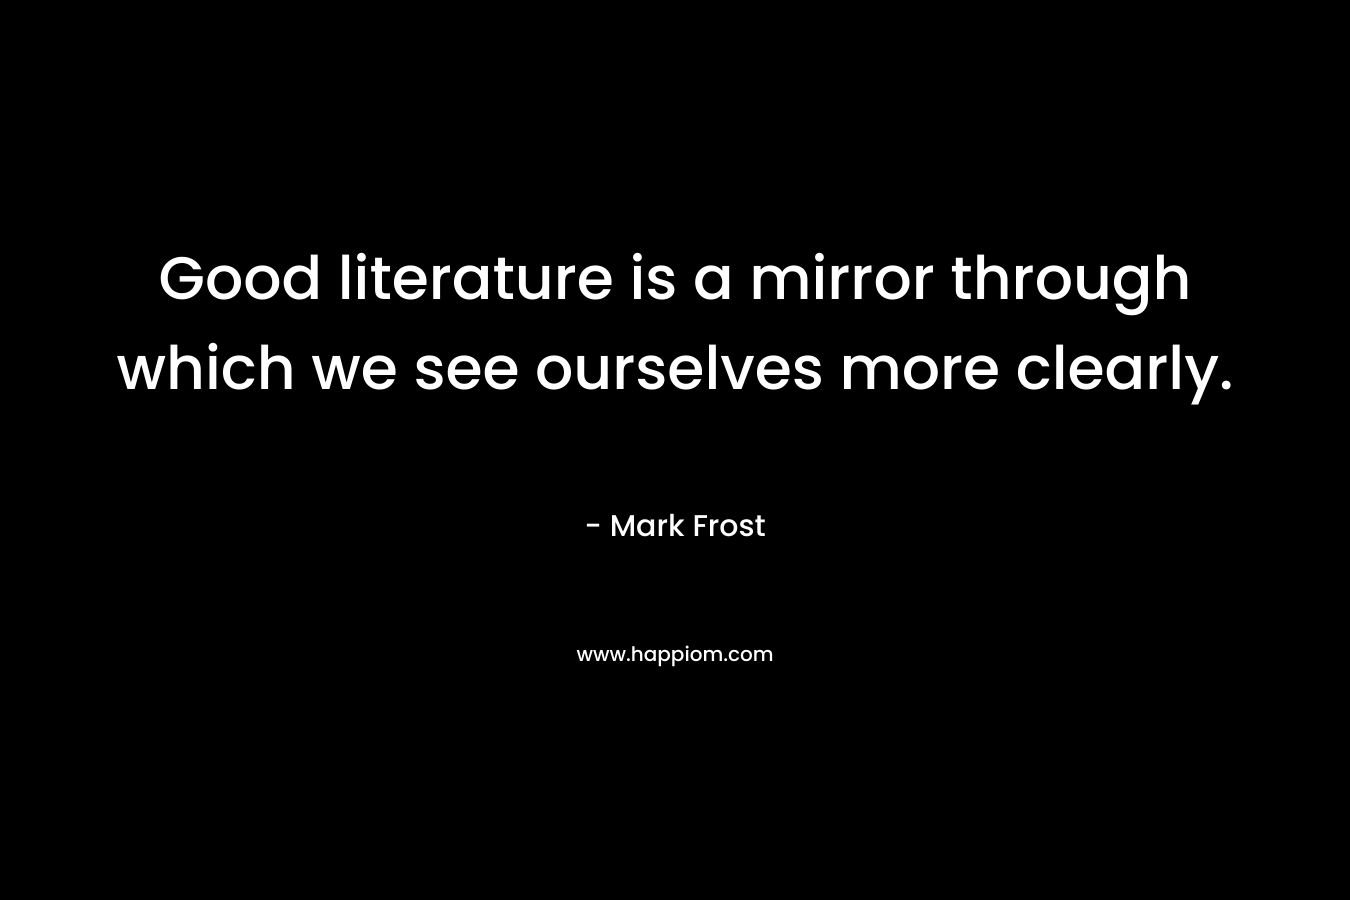 Good literature is a mirror through which we see ourselves more clearly. – Mark Frost